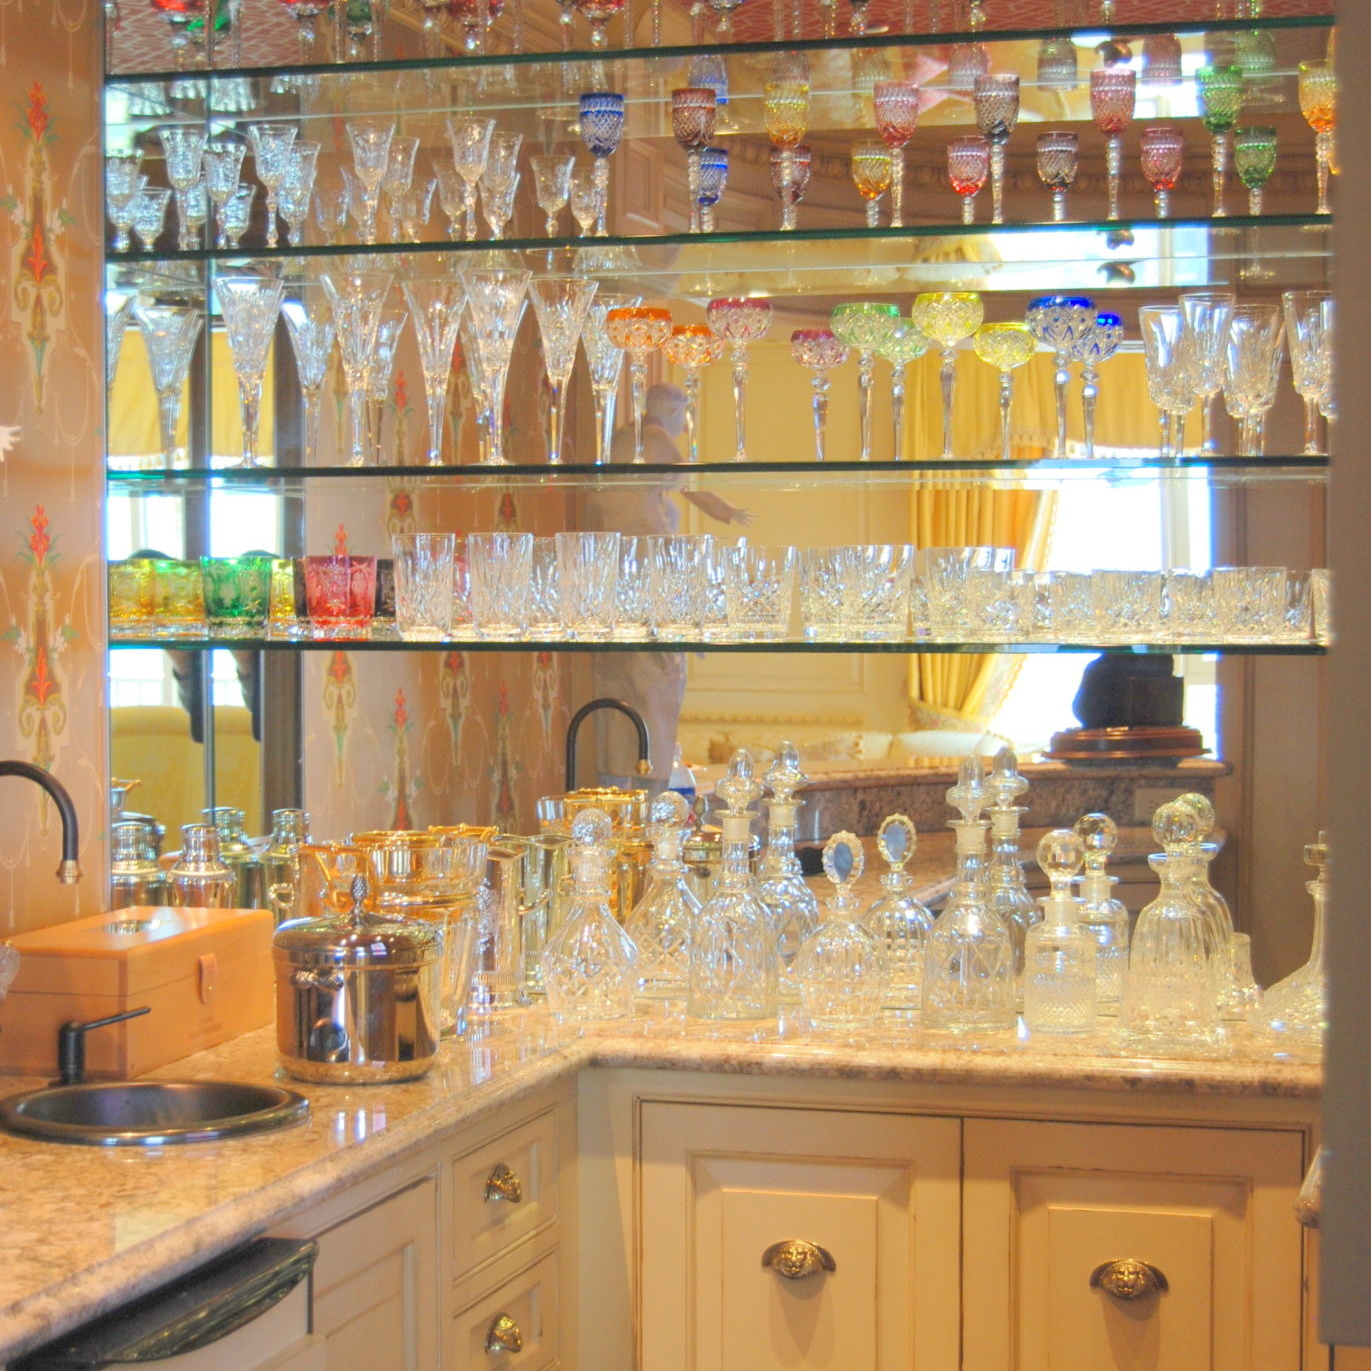 Bar shelving with a variety of crystal glasses